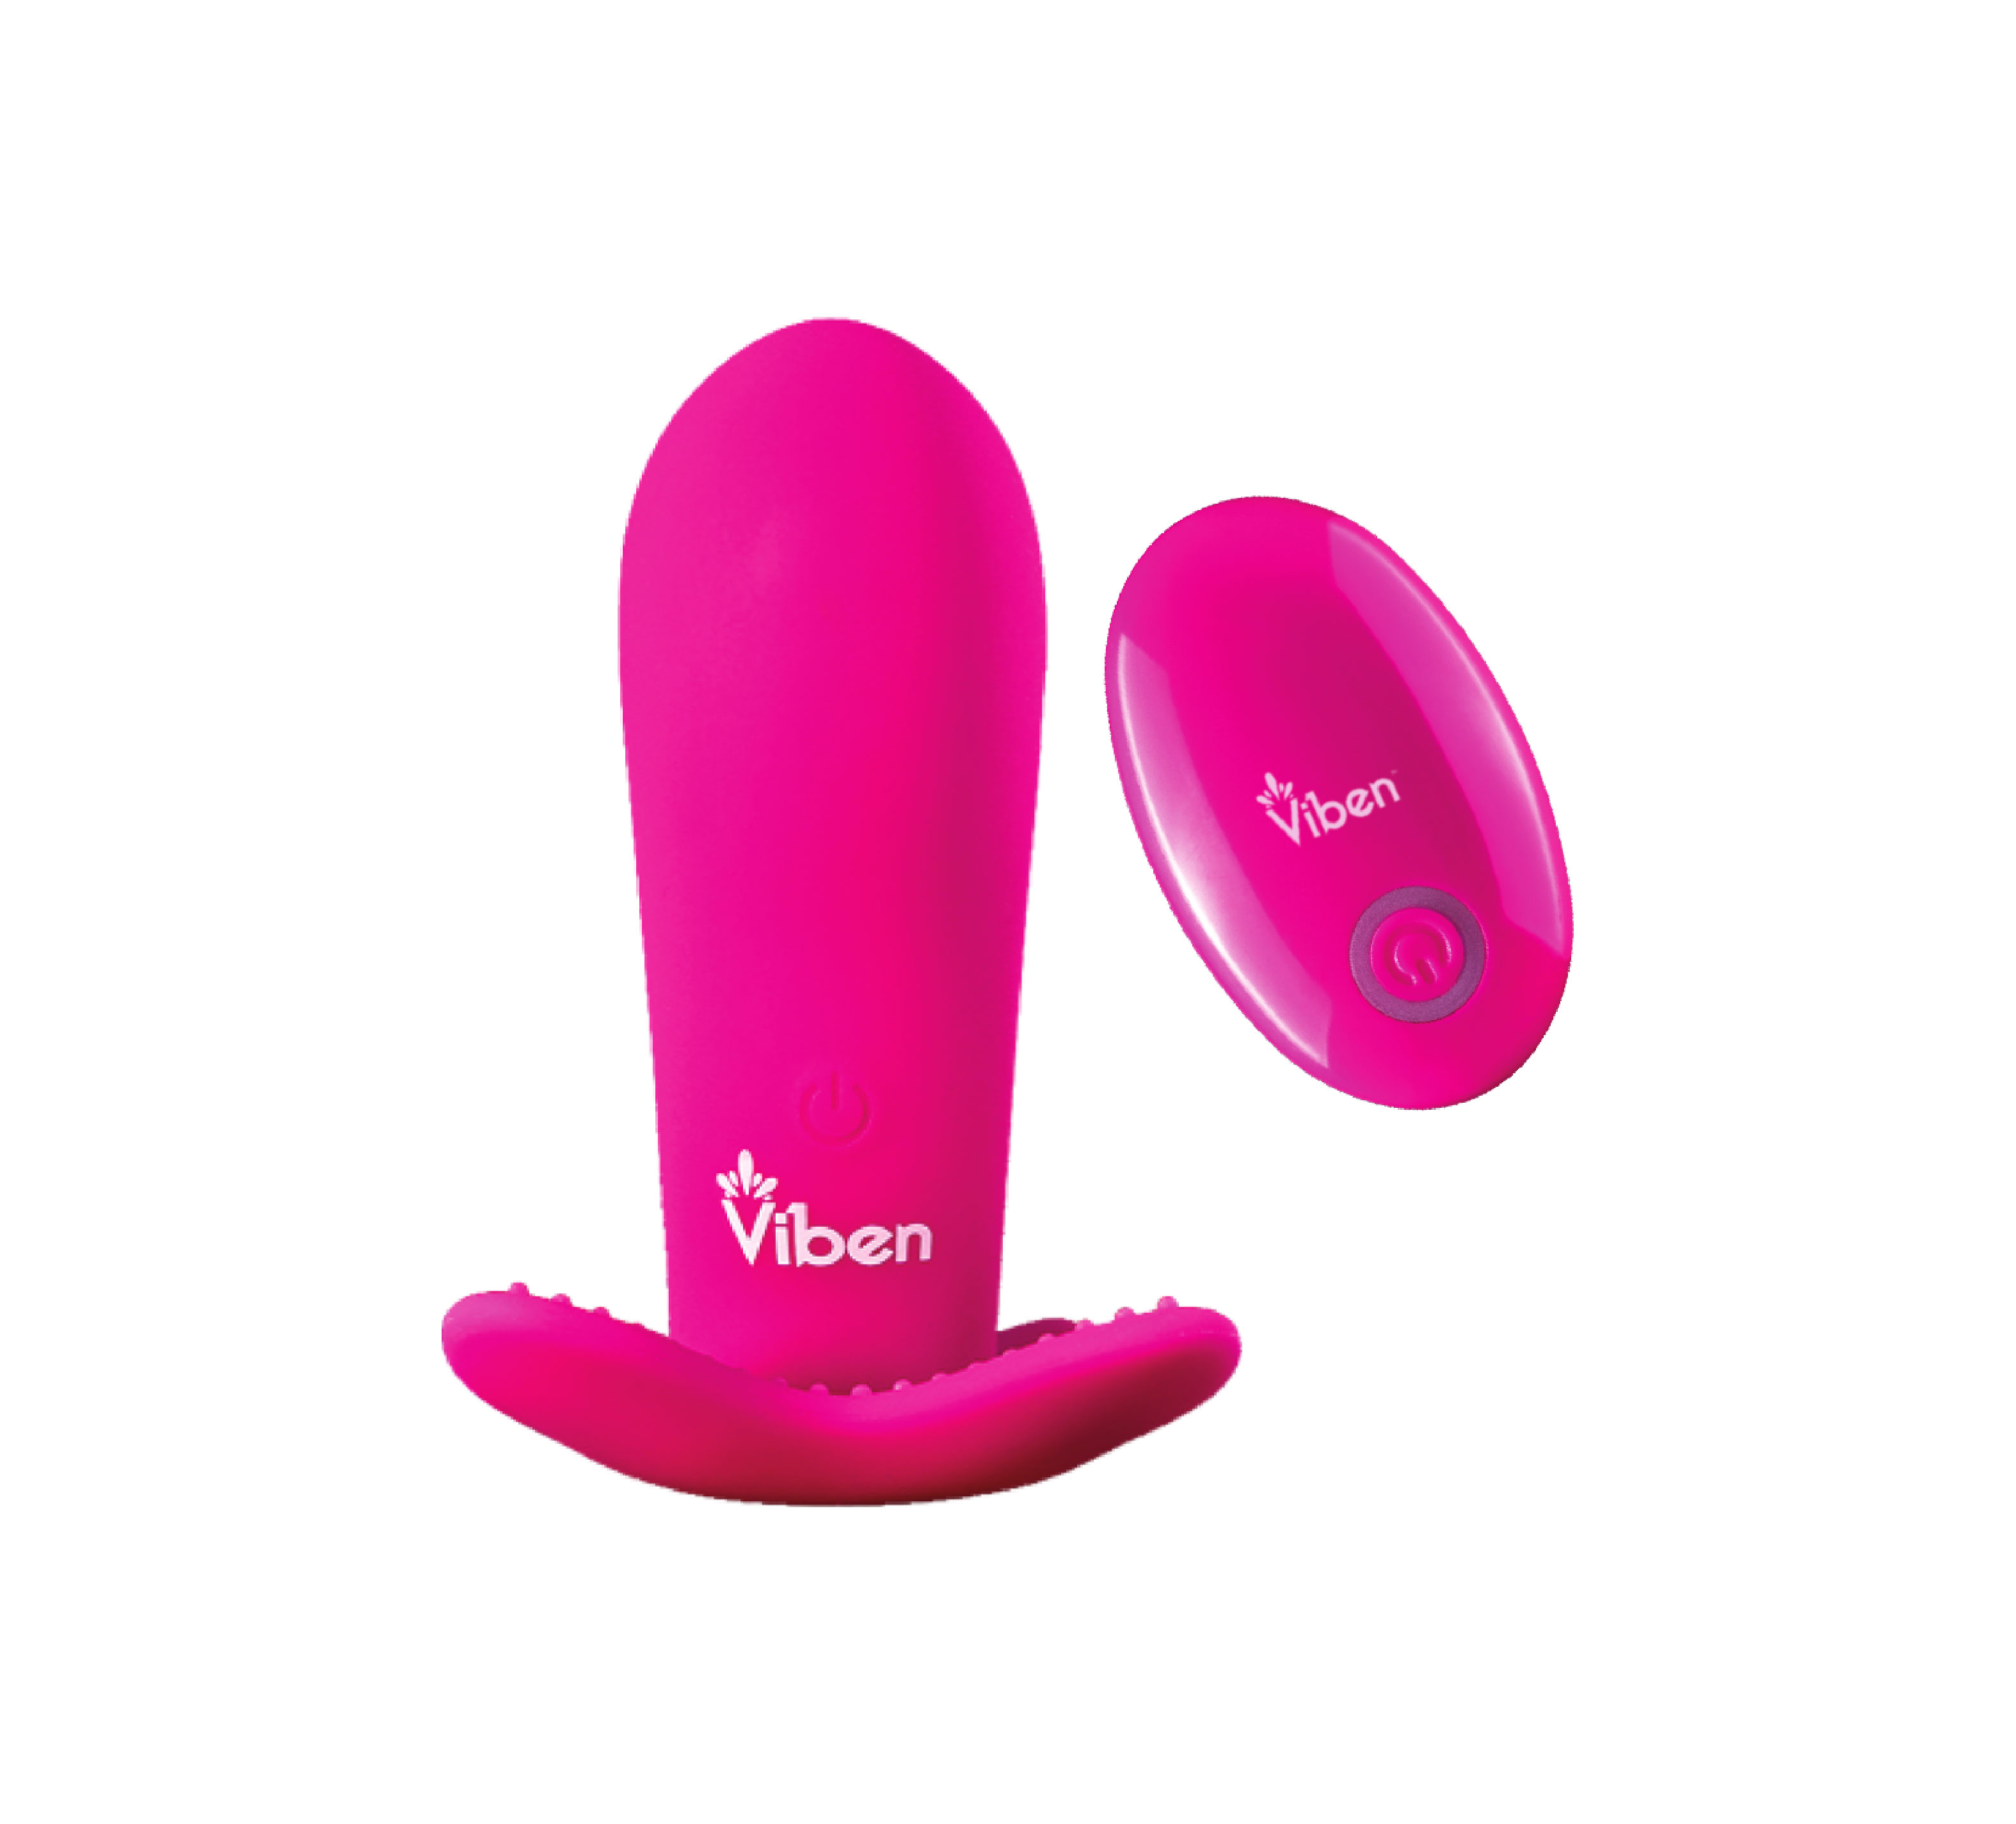 intrigue hot pink remote control  function panty vibe 